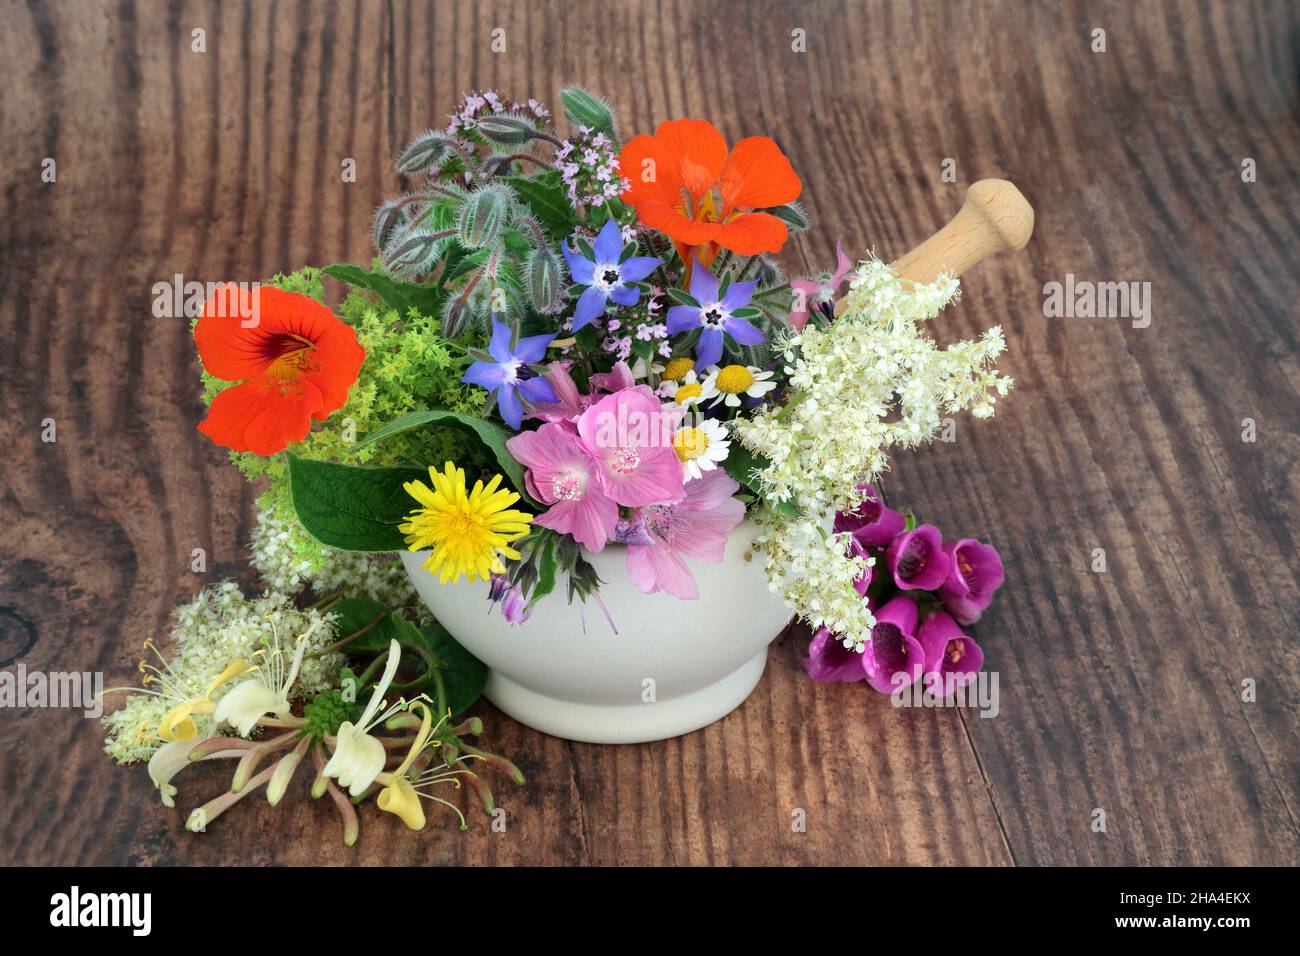 Edible flowers and herbs for natural plant based herbal medicine remedies and food decoration in a mortar. Alternative health and wellness concept. Stock Photo